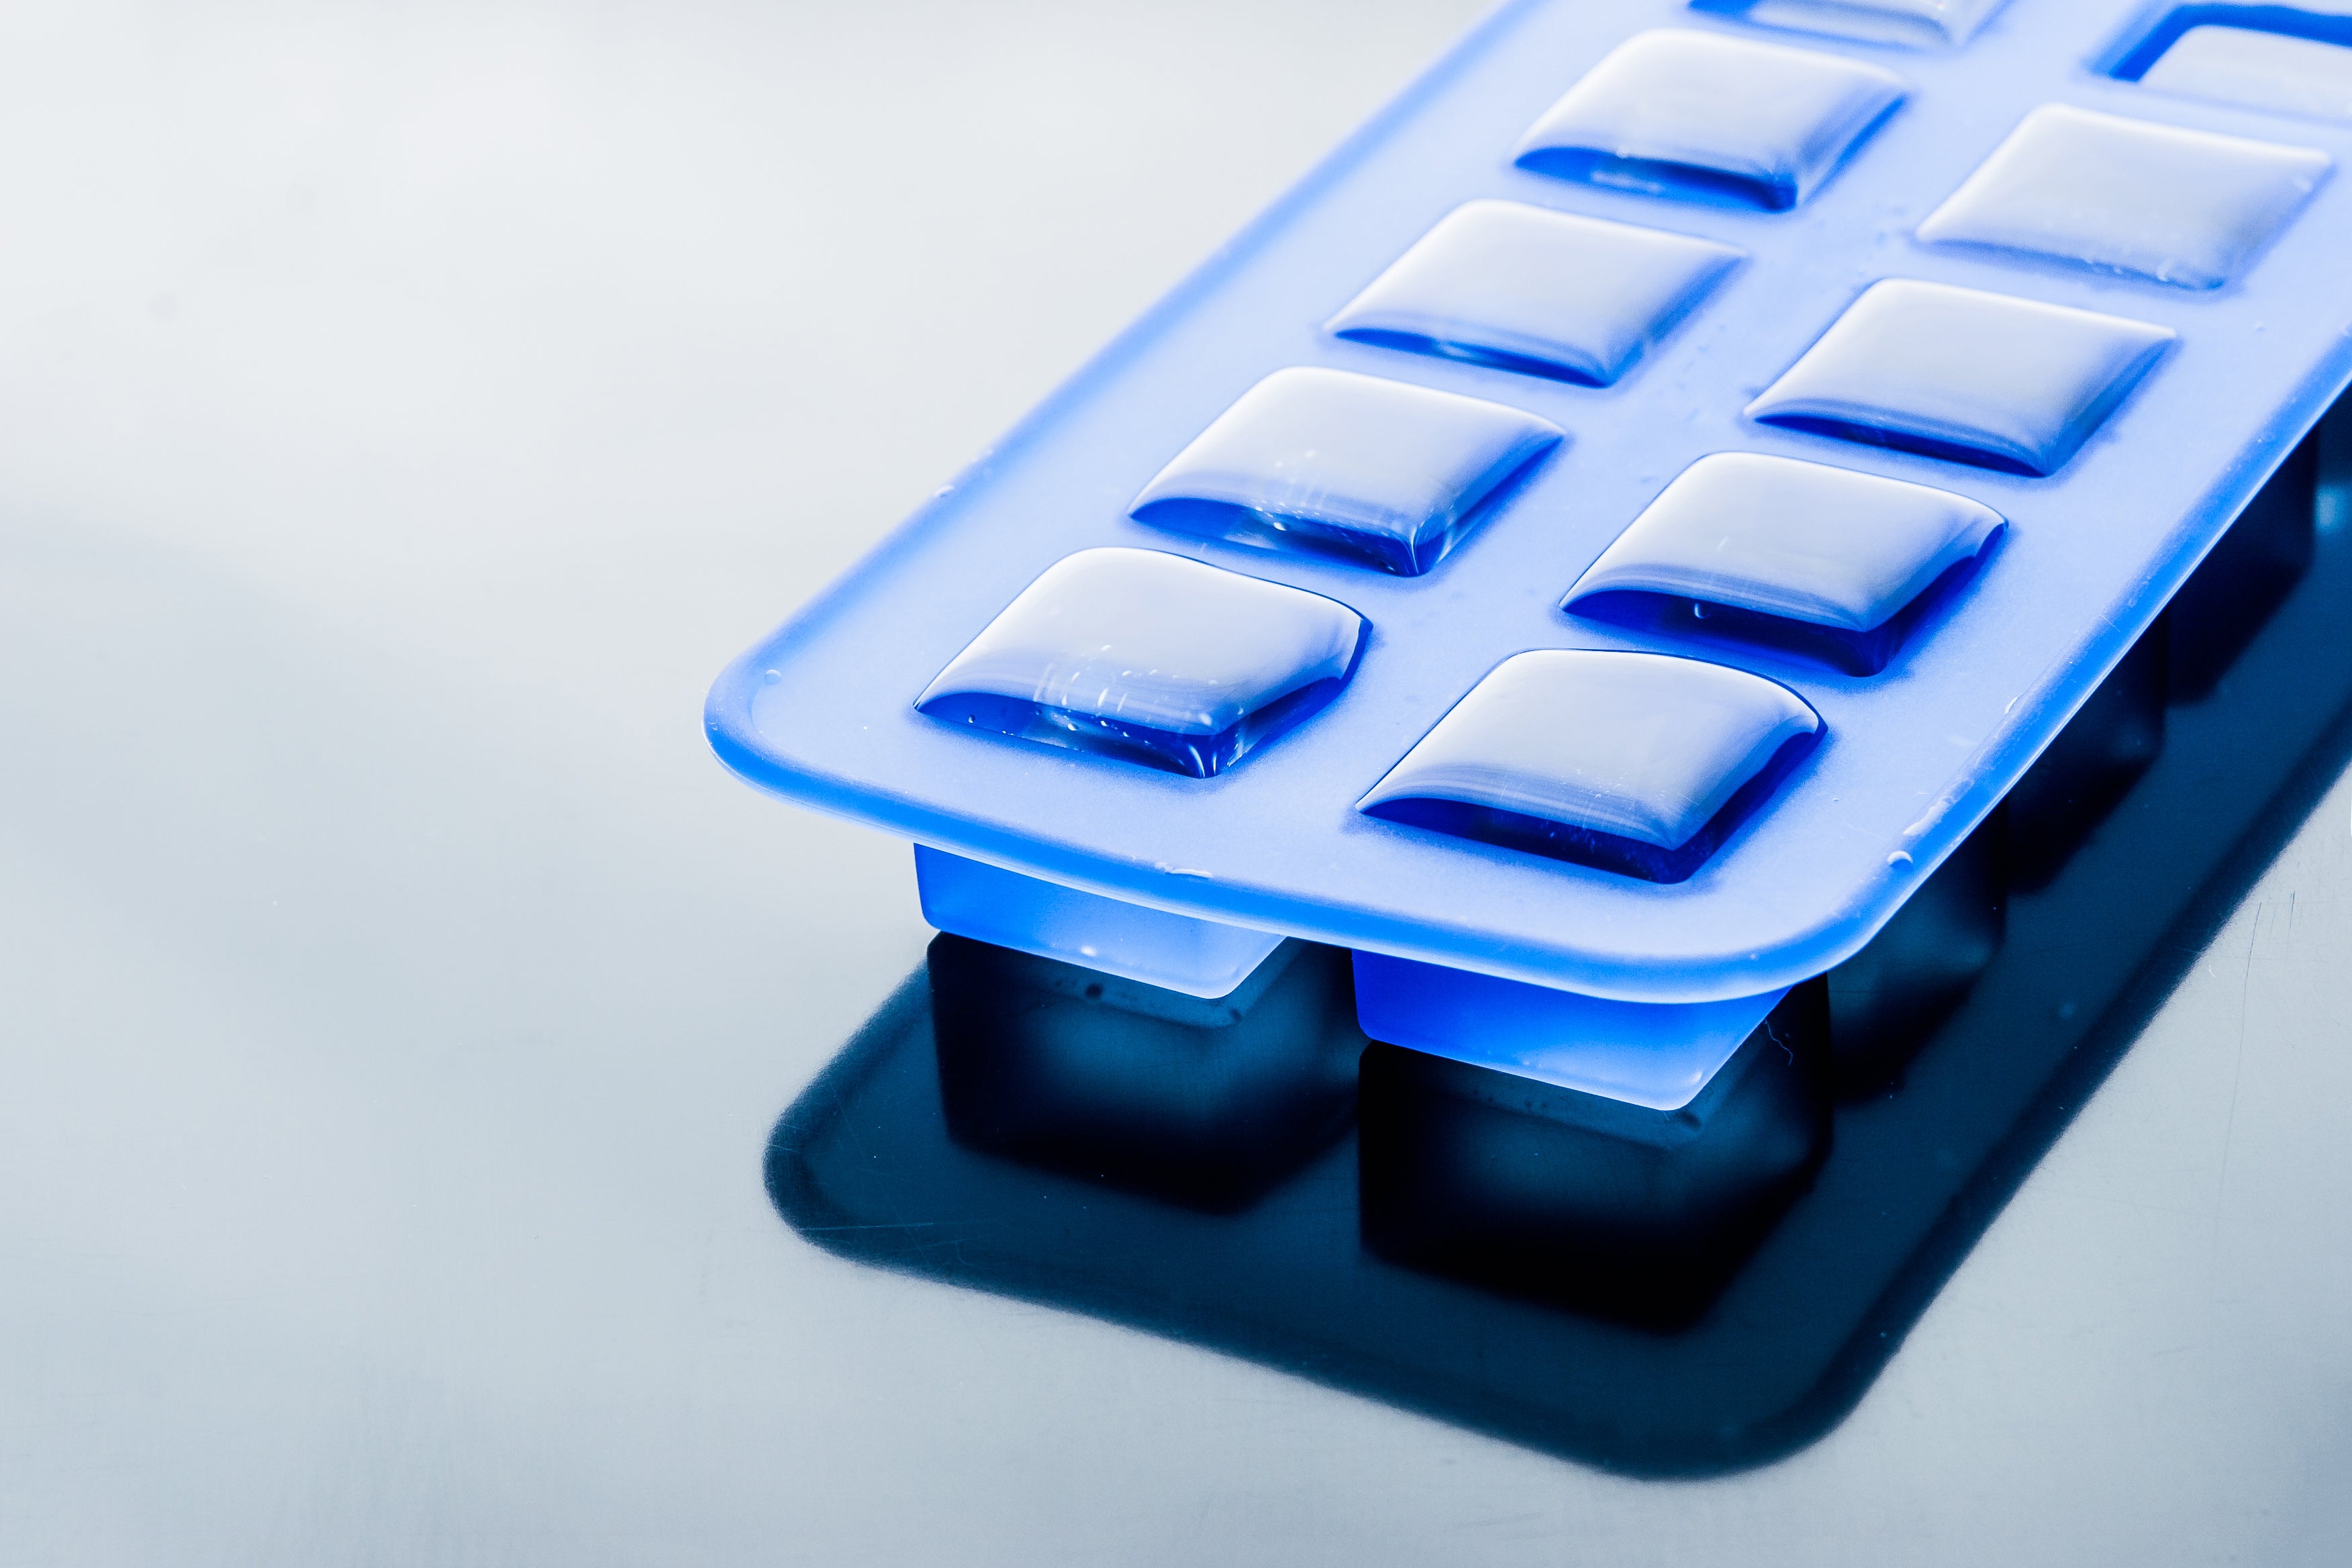 Are Silicone Ice Cube Trays Safe? Answers to All Your Ice Making